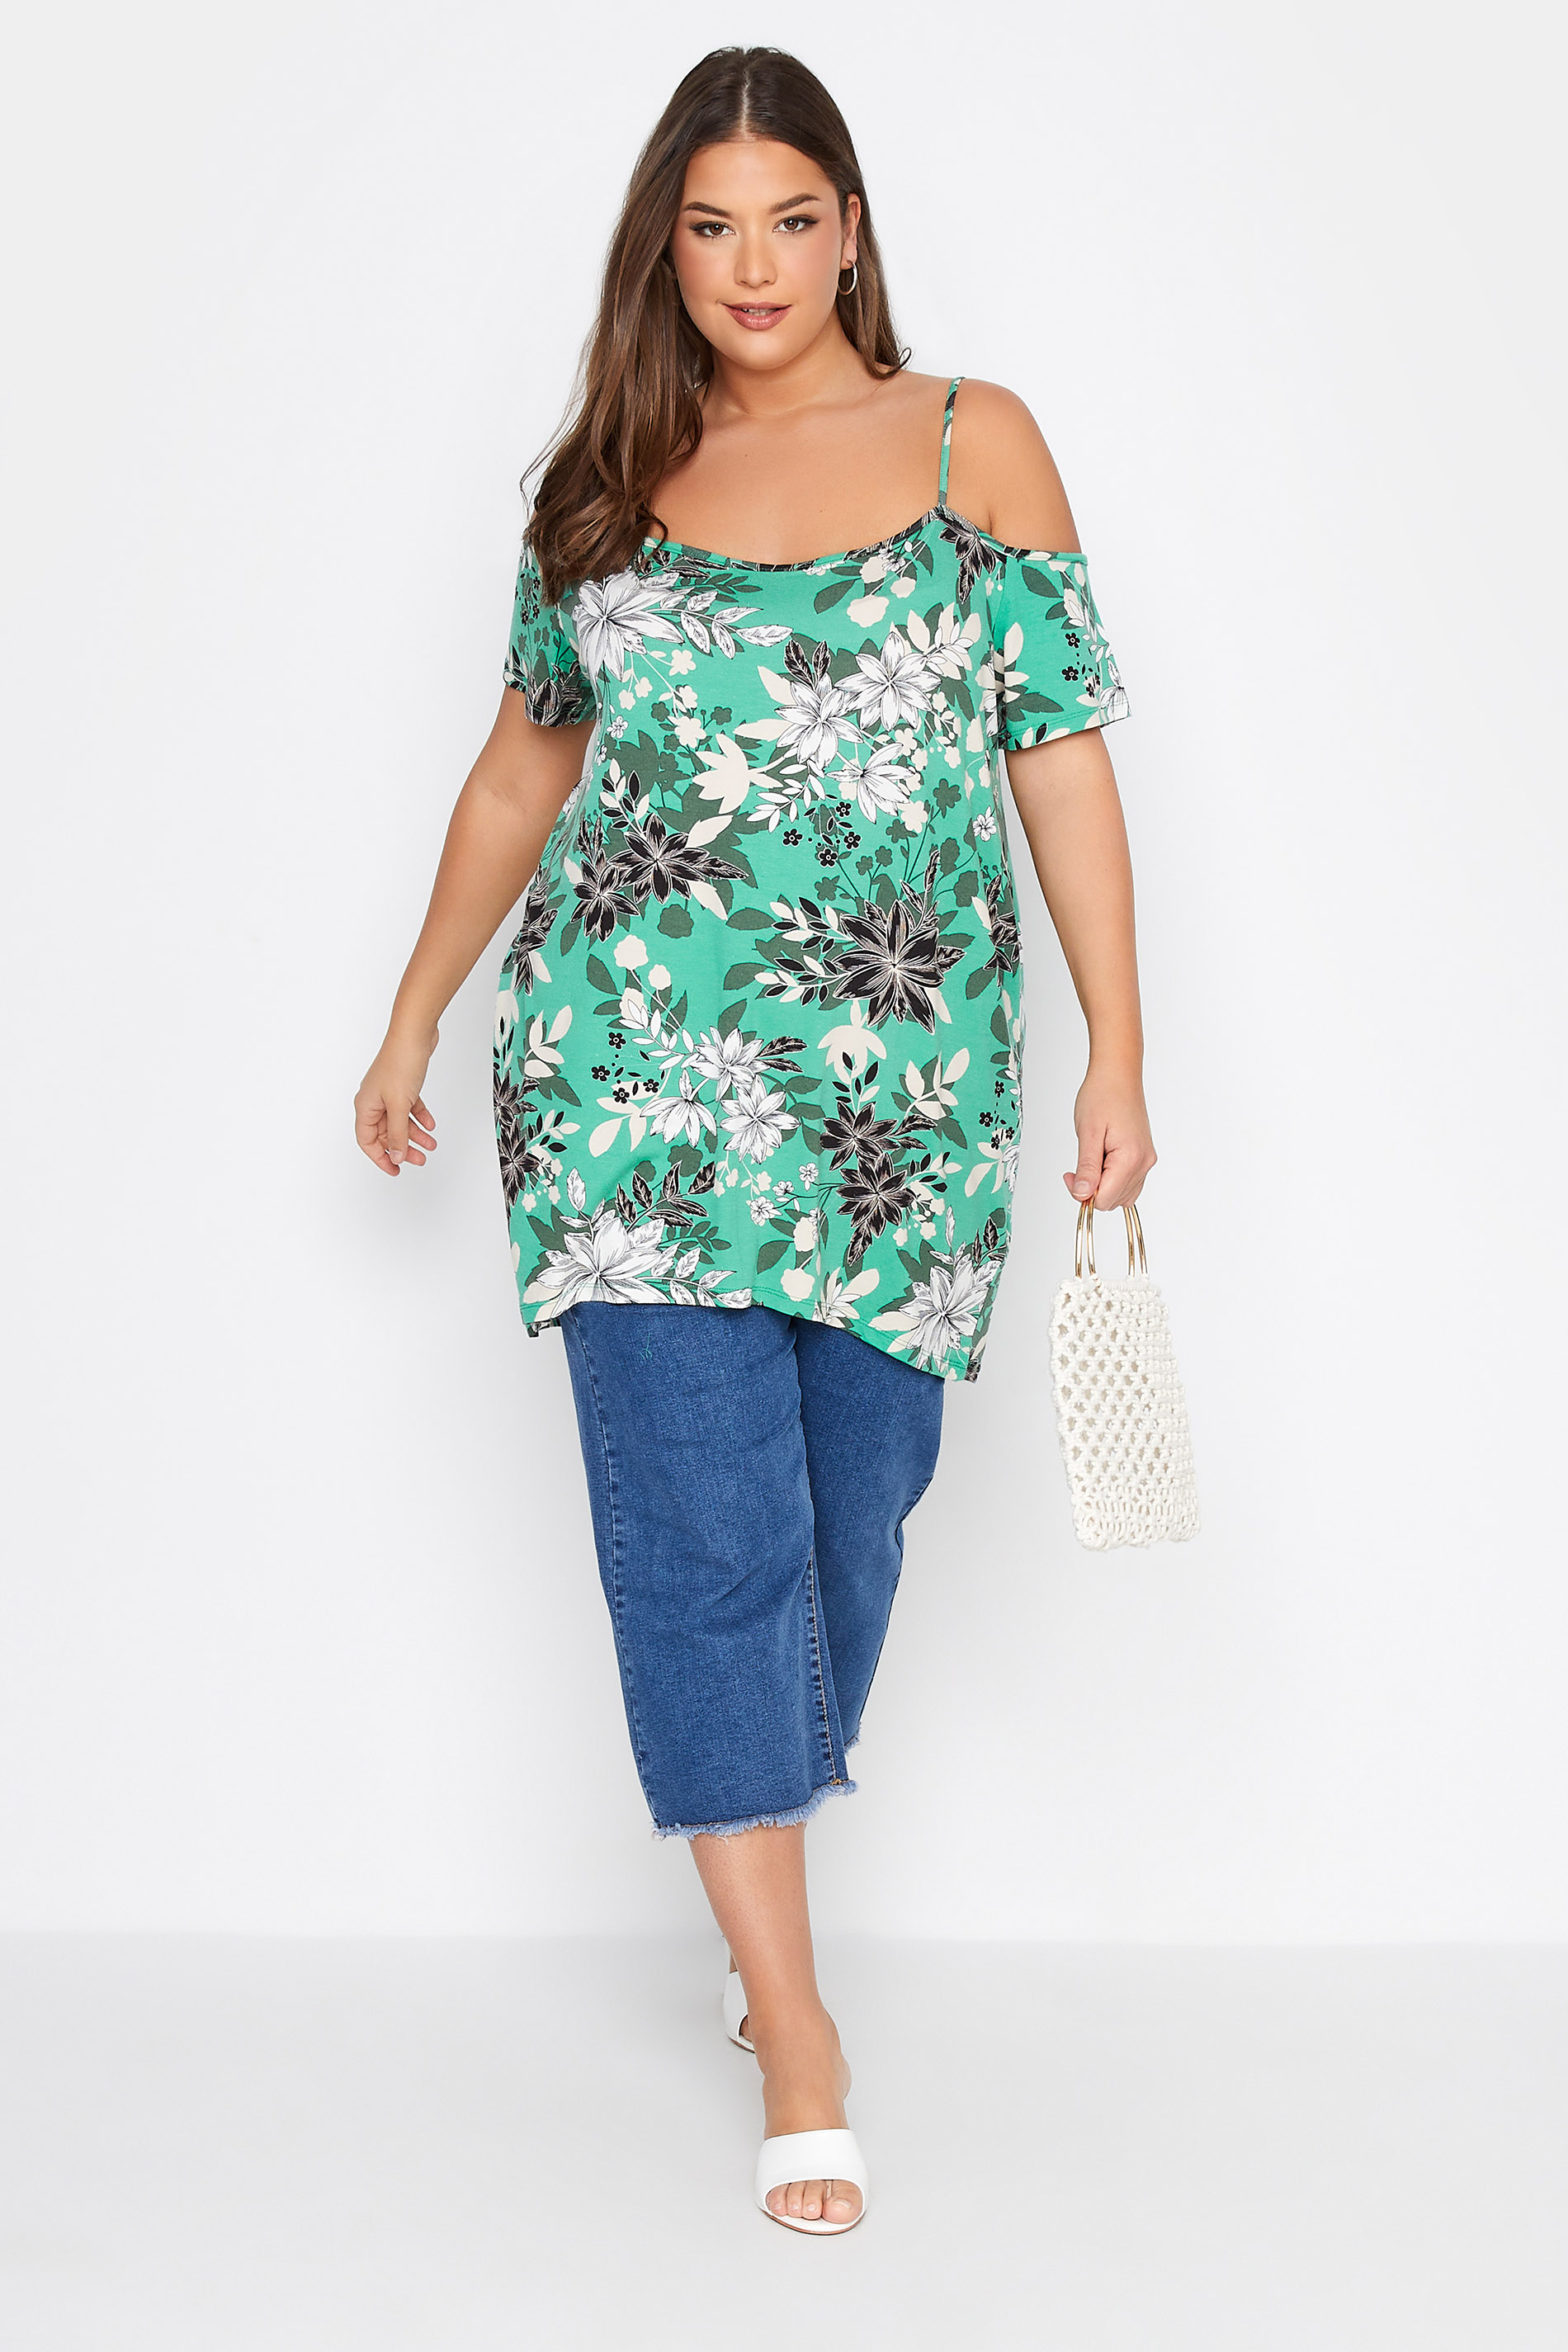 Grande taille  Tops Grande taille  Tops Épaules Ajourées & Style Bardot | Top Vert Tropical Floral Style Bardot - FD19314